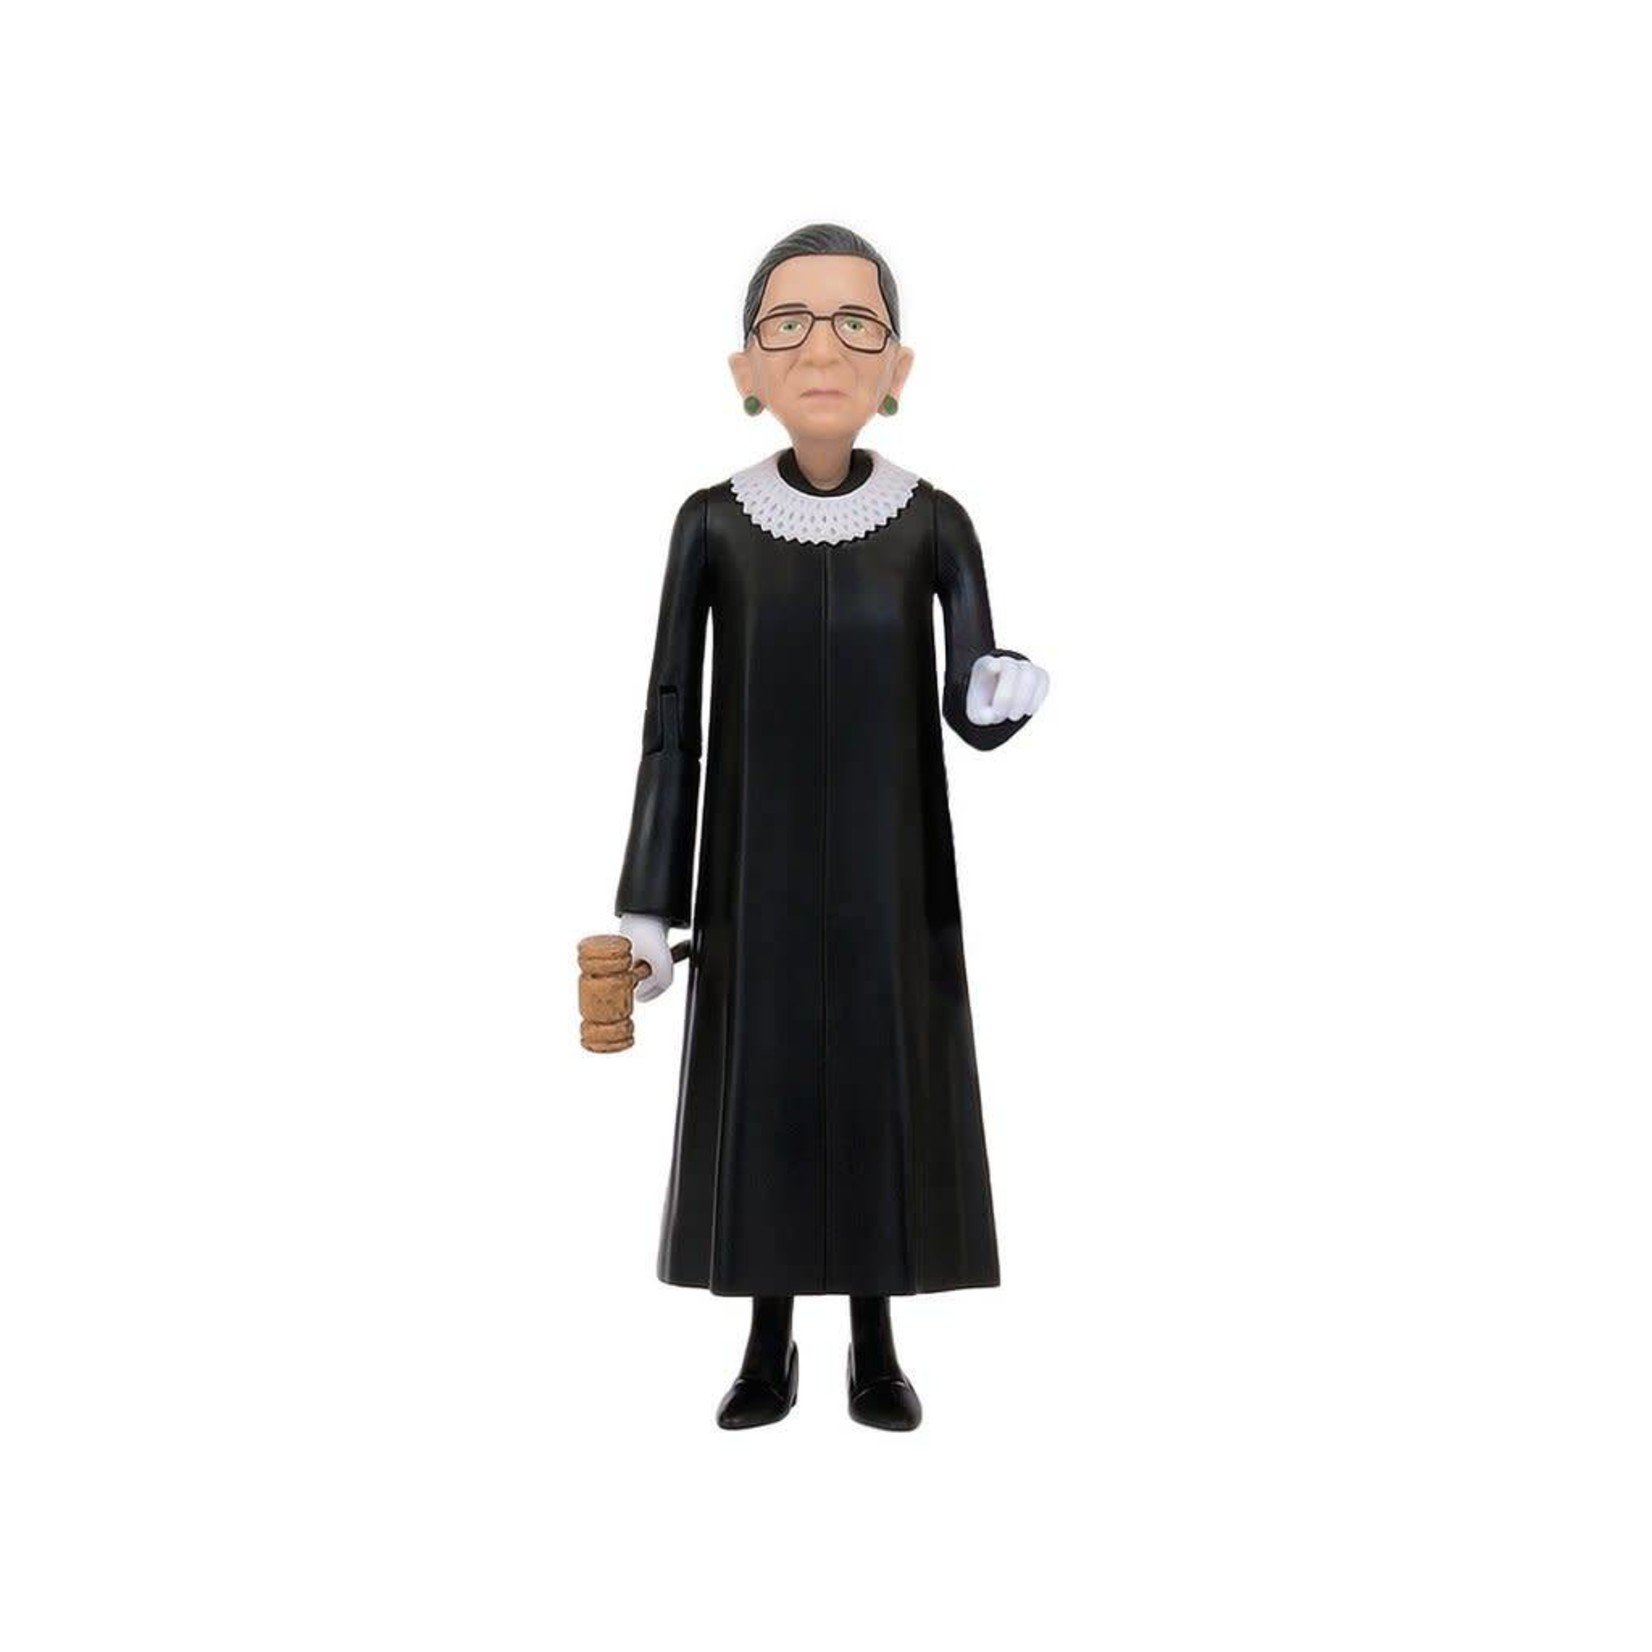 FCTRY Ruth Bader Ginsburg Action Figure